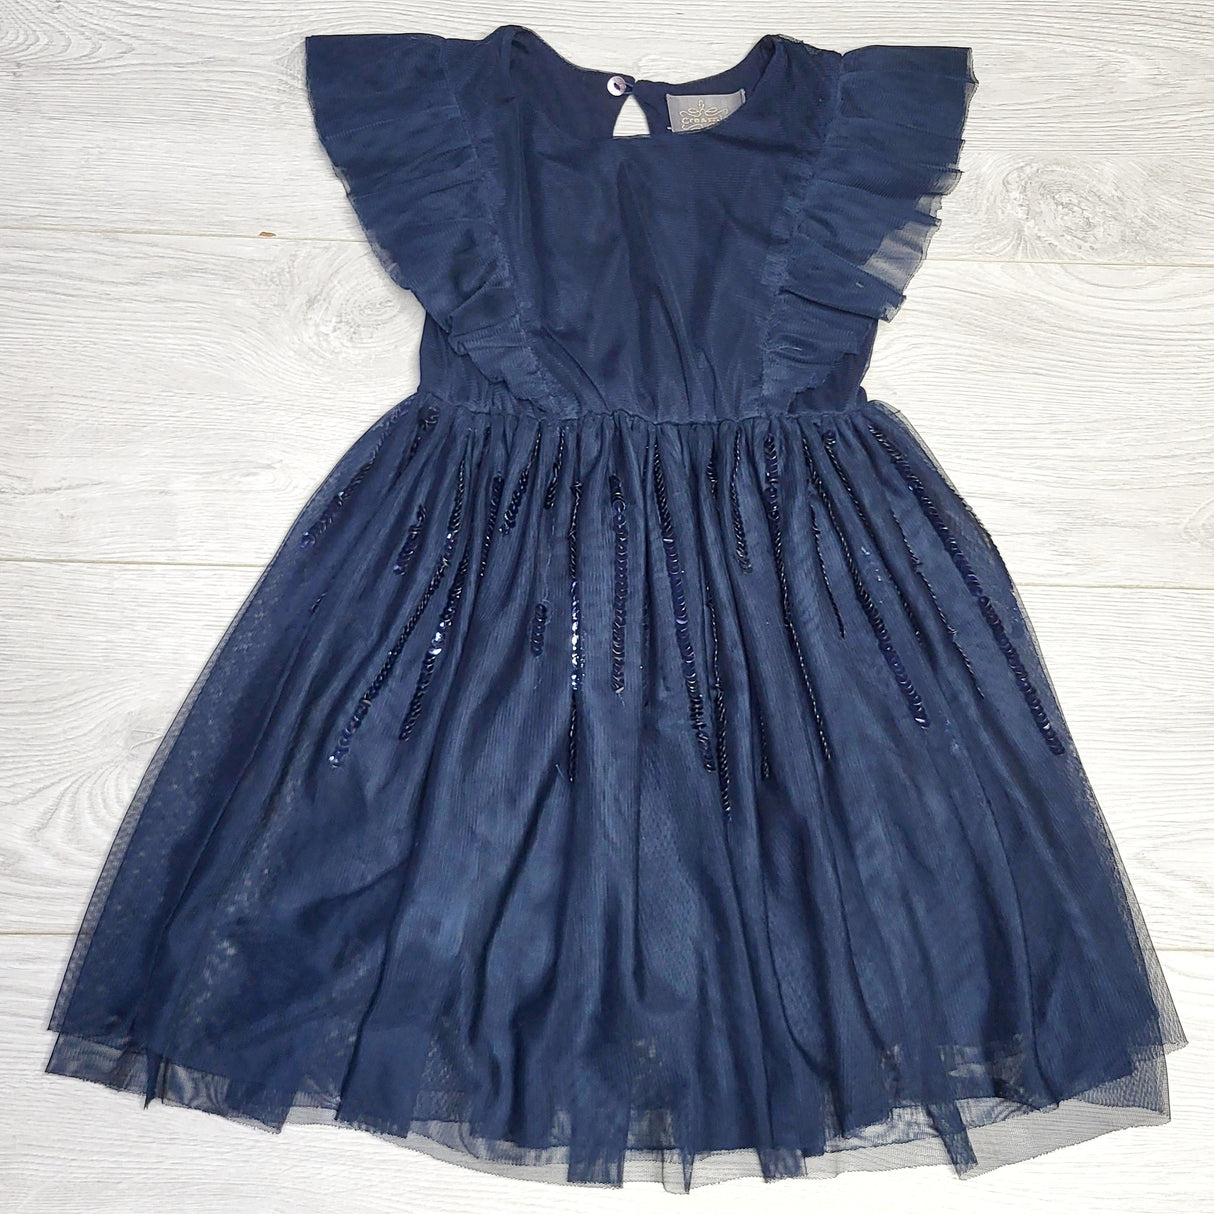 HWIL1 - Creamie navy "Total Eclipse" party dress. Approx size 5T